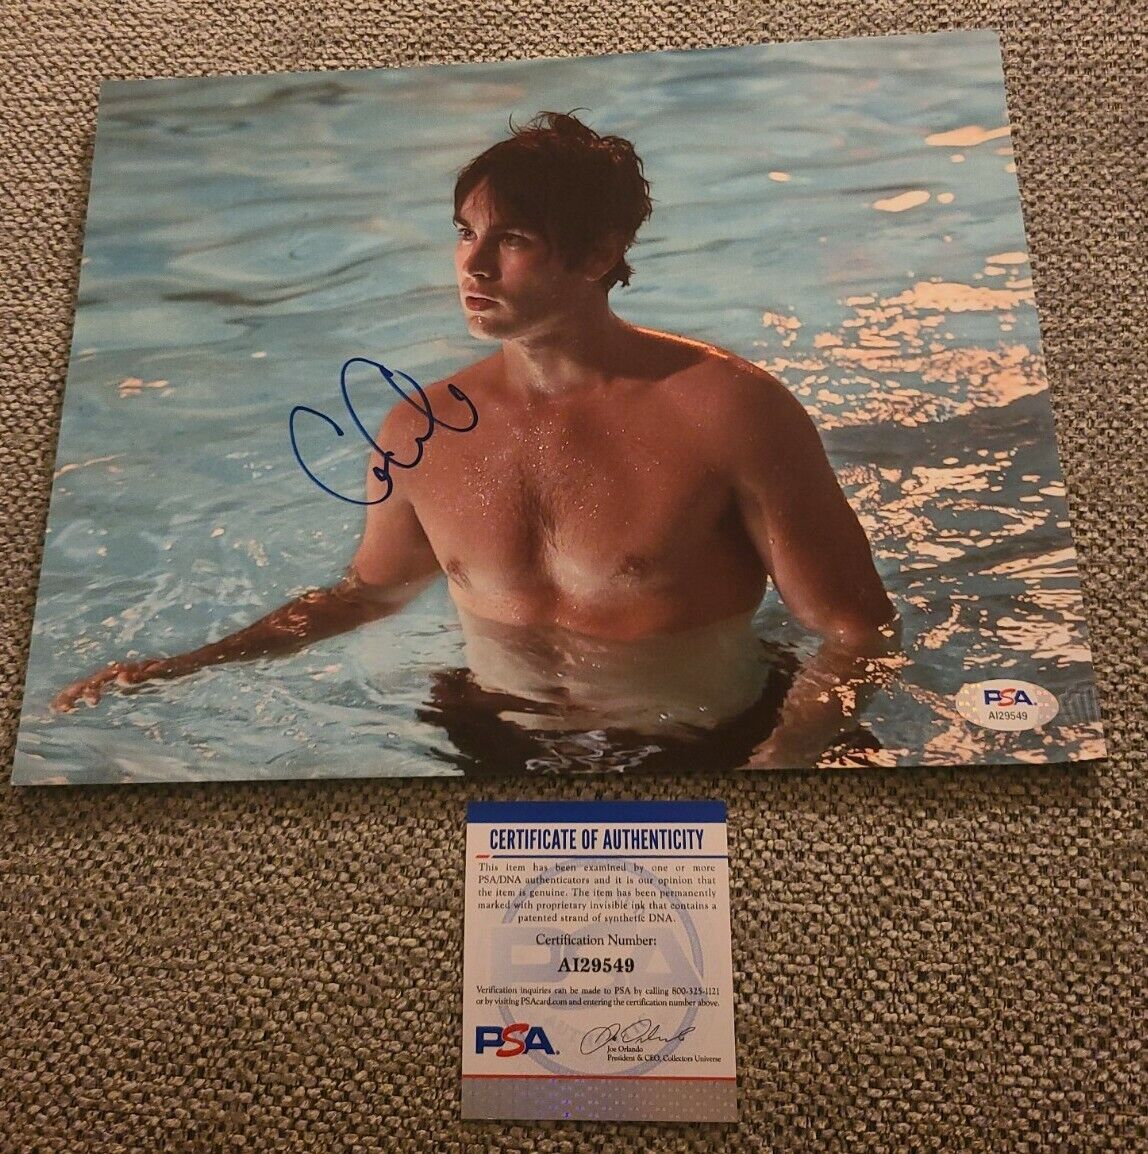 CHACE CRAWFORD SIGNED 8X10 PHOTO SEXY GOSSIP GIRL PSA/DNA AUTHENTICATED #AI29549